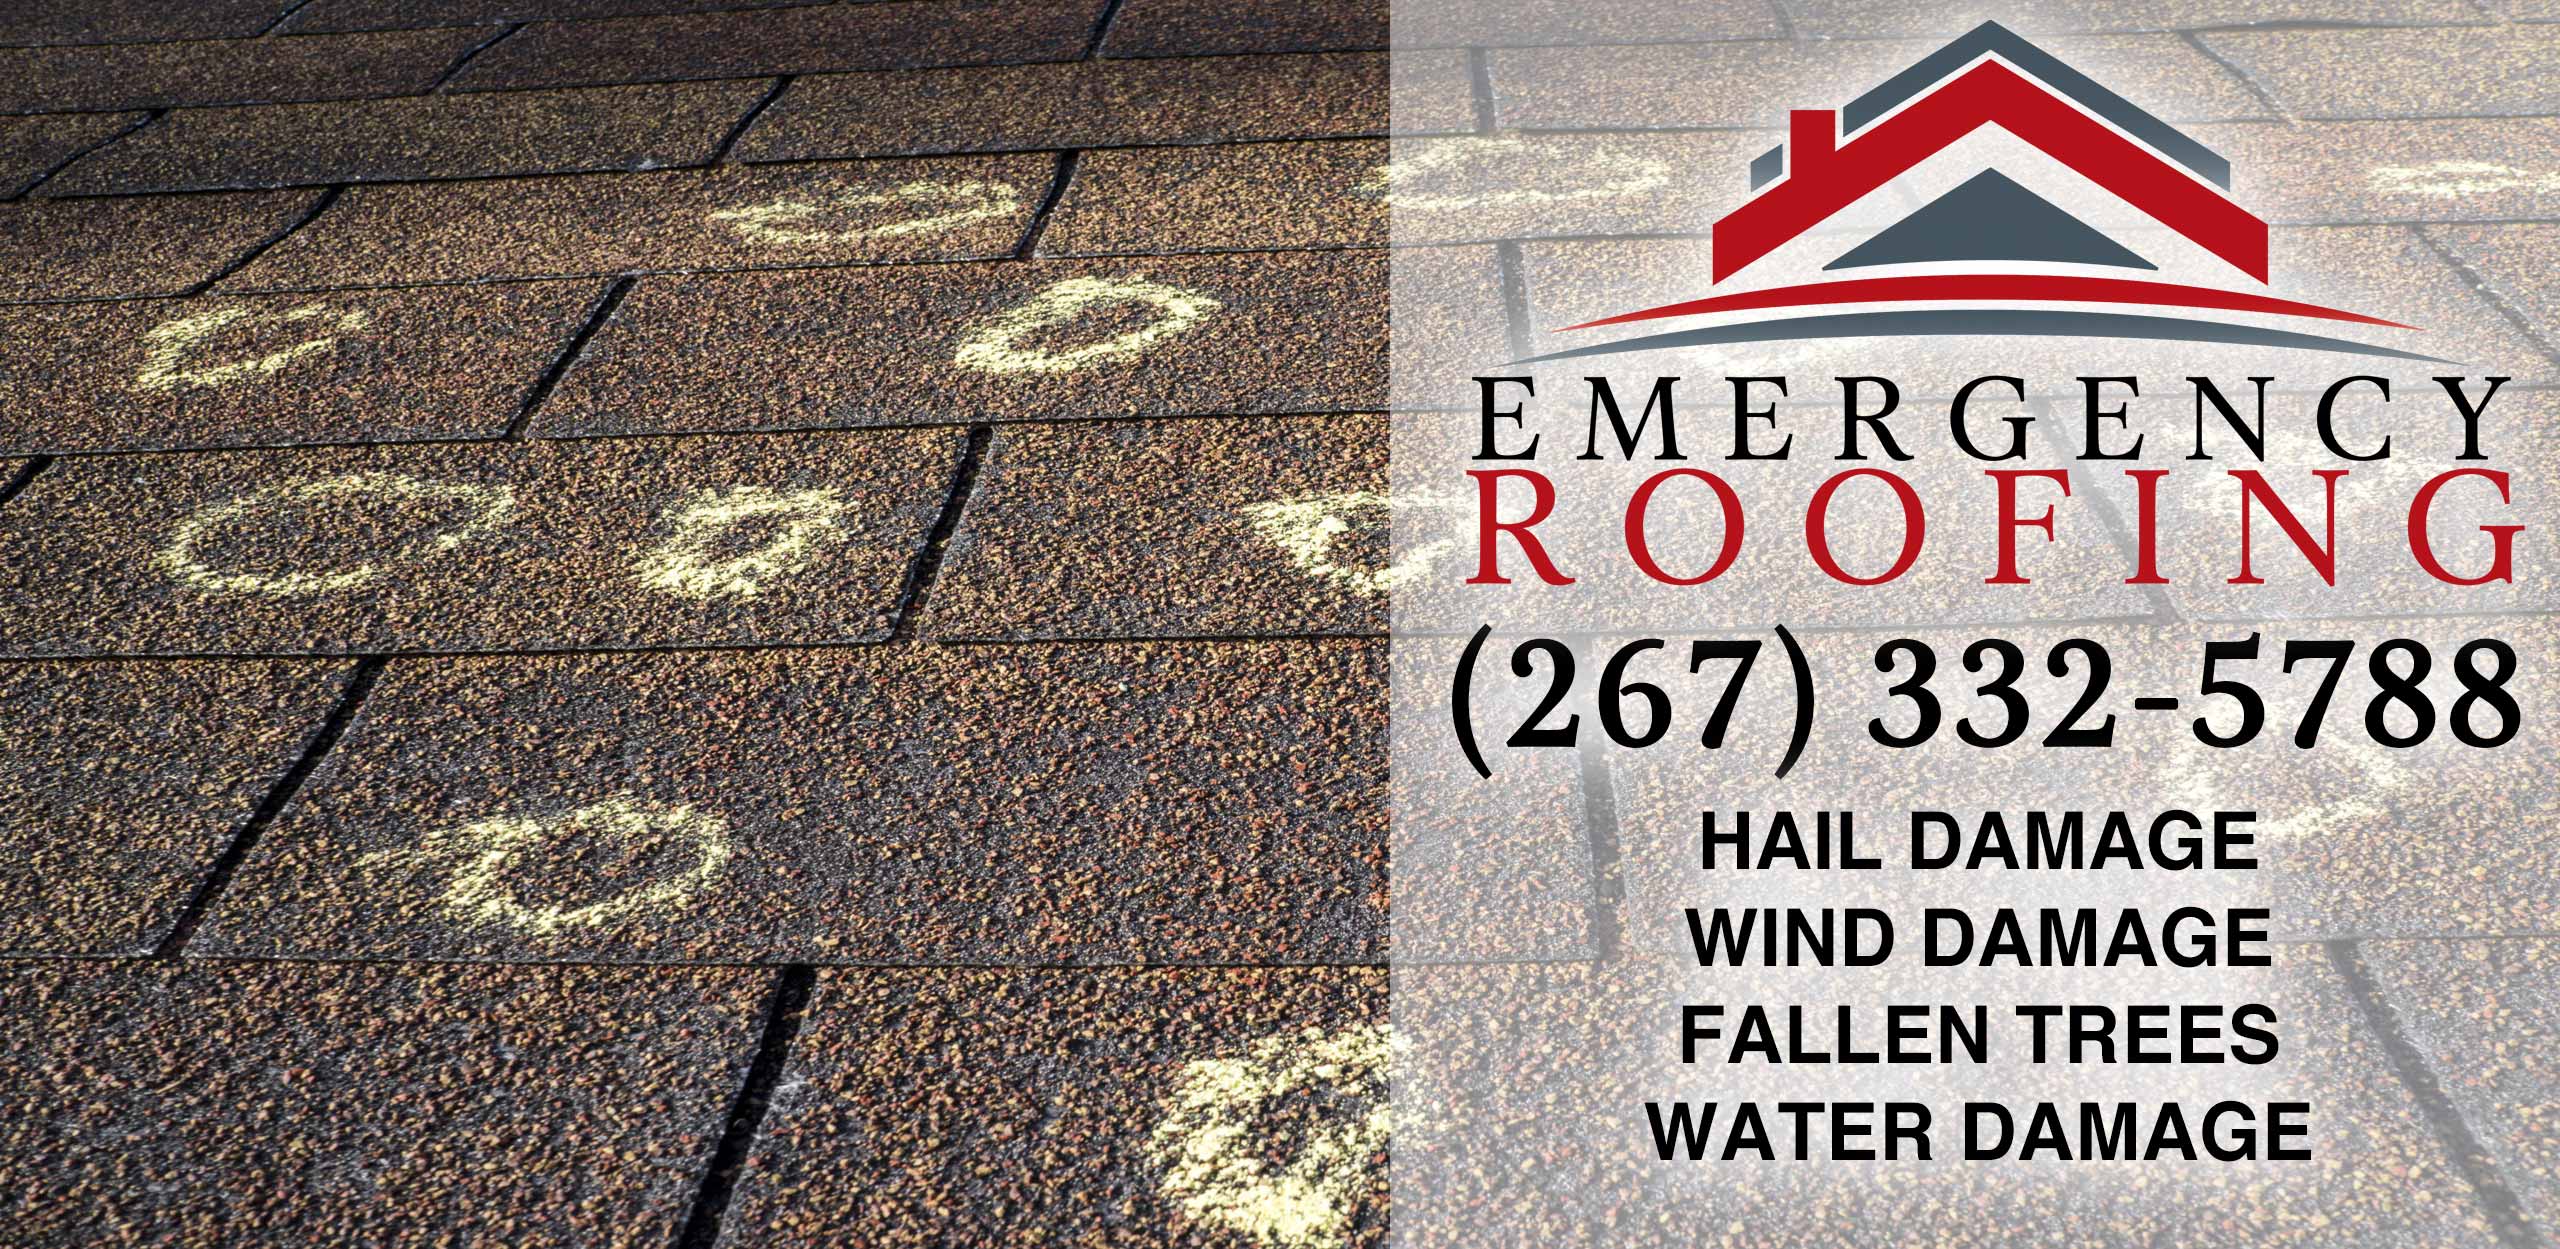 Emergency Roof Repair 19115 Bustleton 19116 Somerton Northeast Philly residential leaks repair services commercial tar roof replacement free estimate